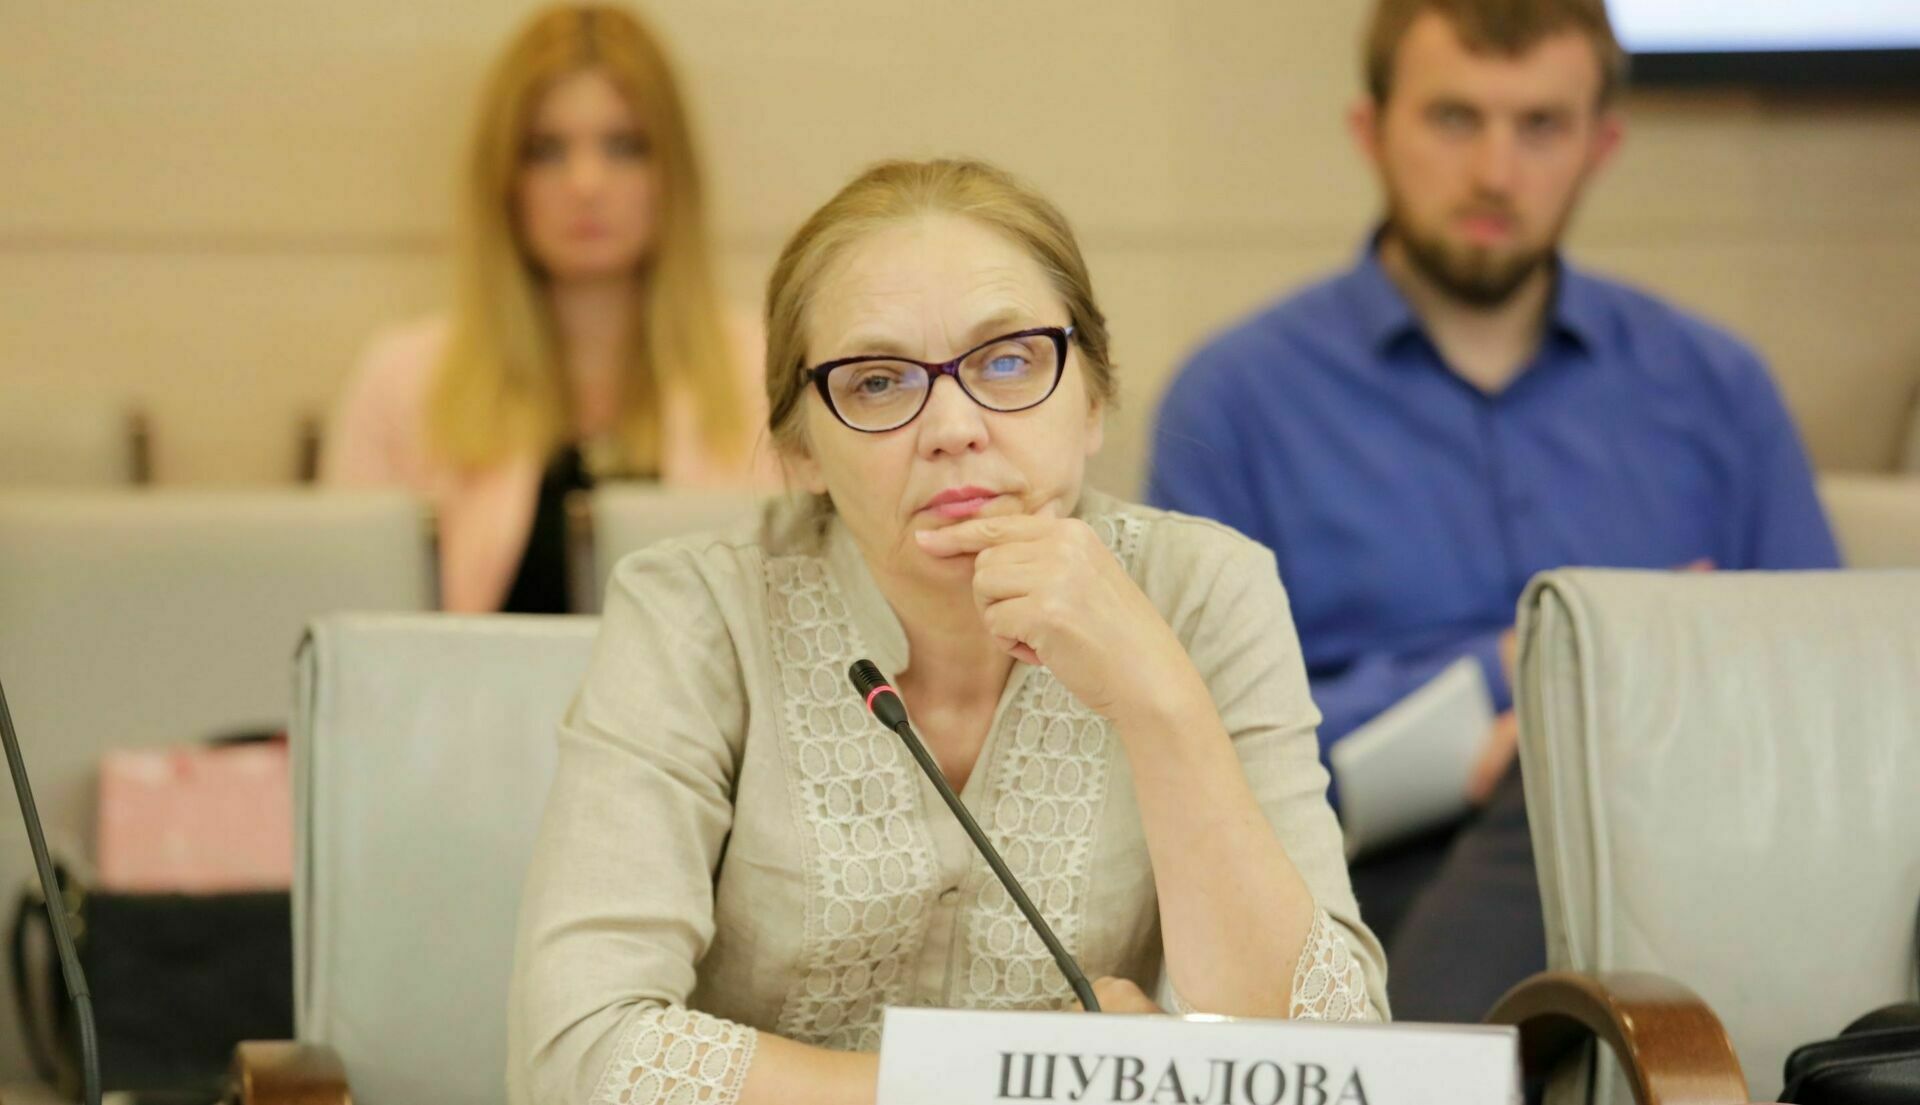 Exclusion from the Communist Party of the Moscow City Duma deputy Elena Shuvalova was implemented with the participation of the Special police force